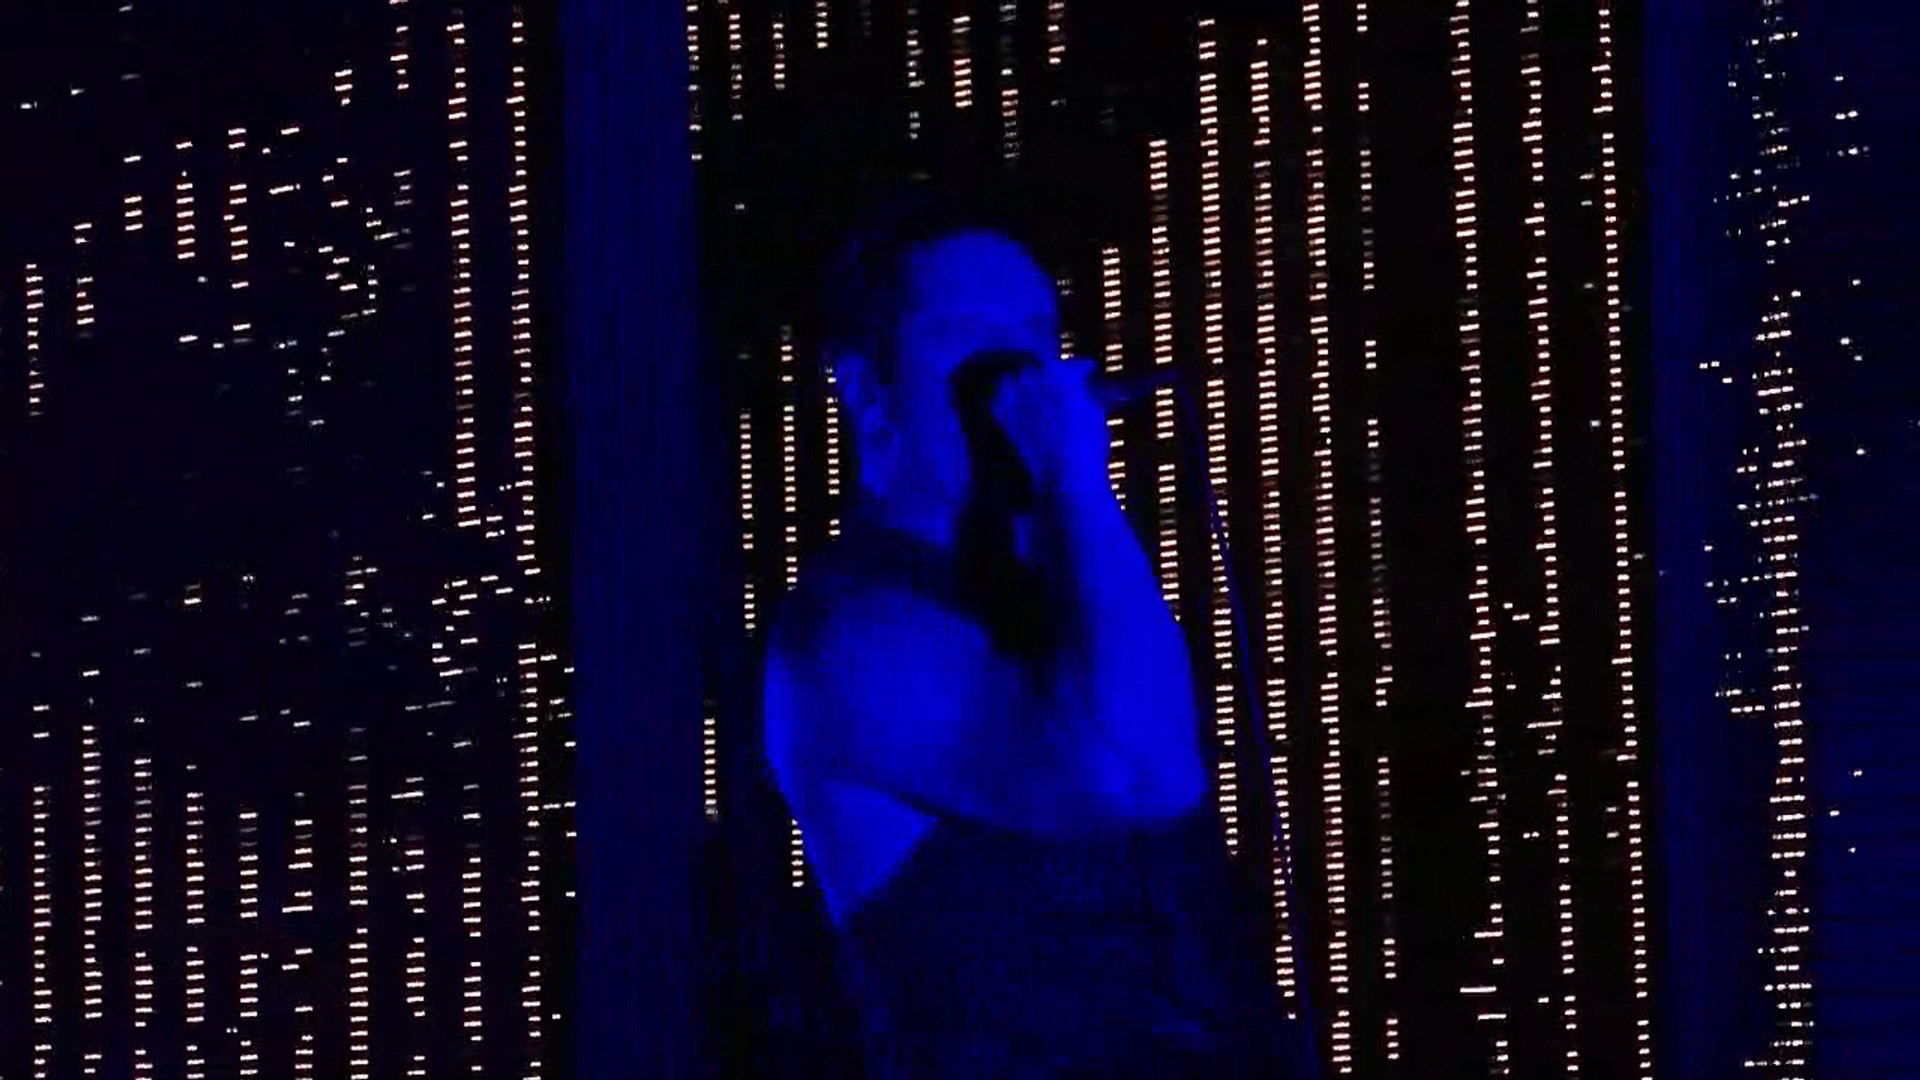 Only - Nine Inch Nails (live) - video Dailymotion